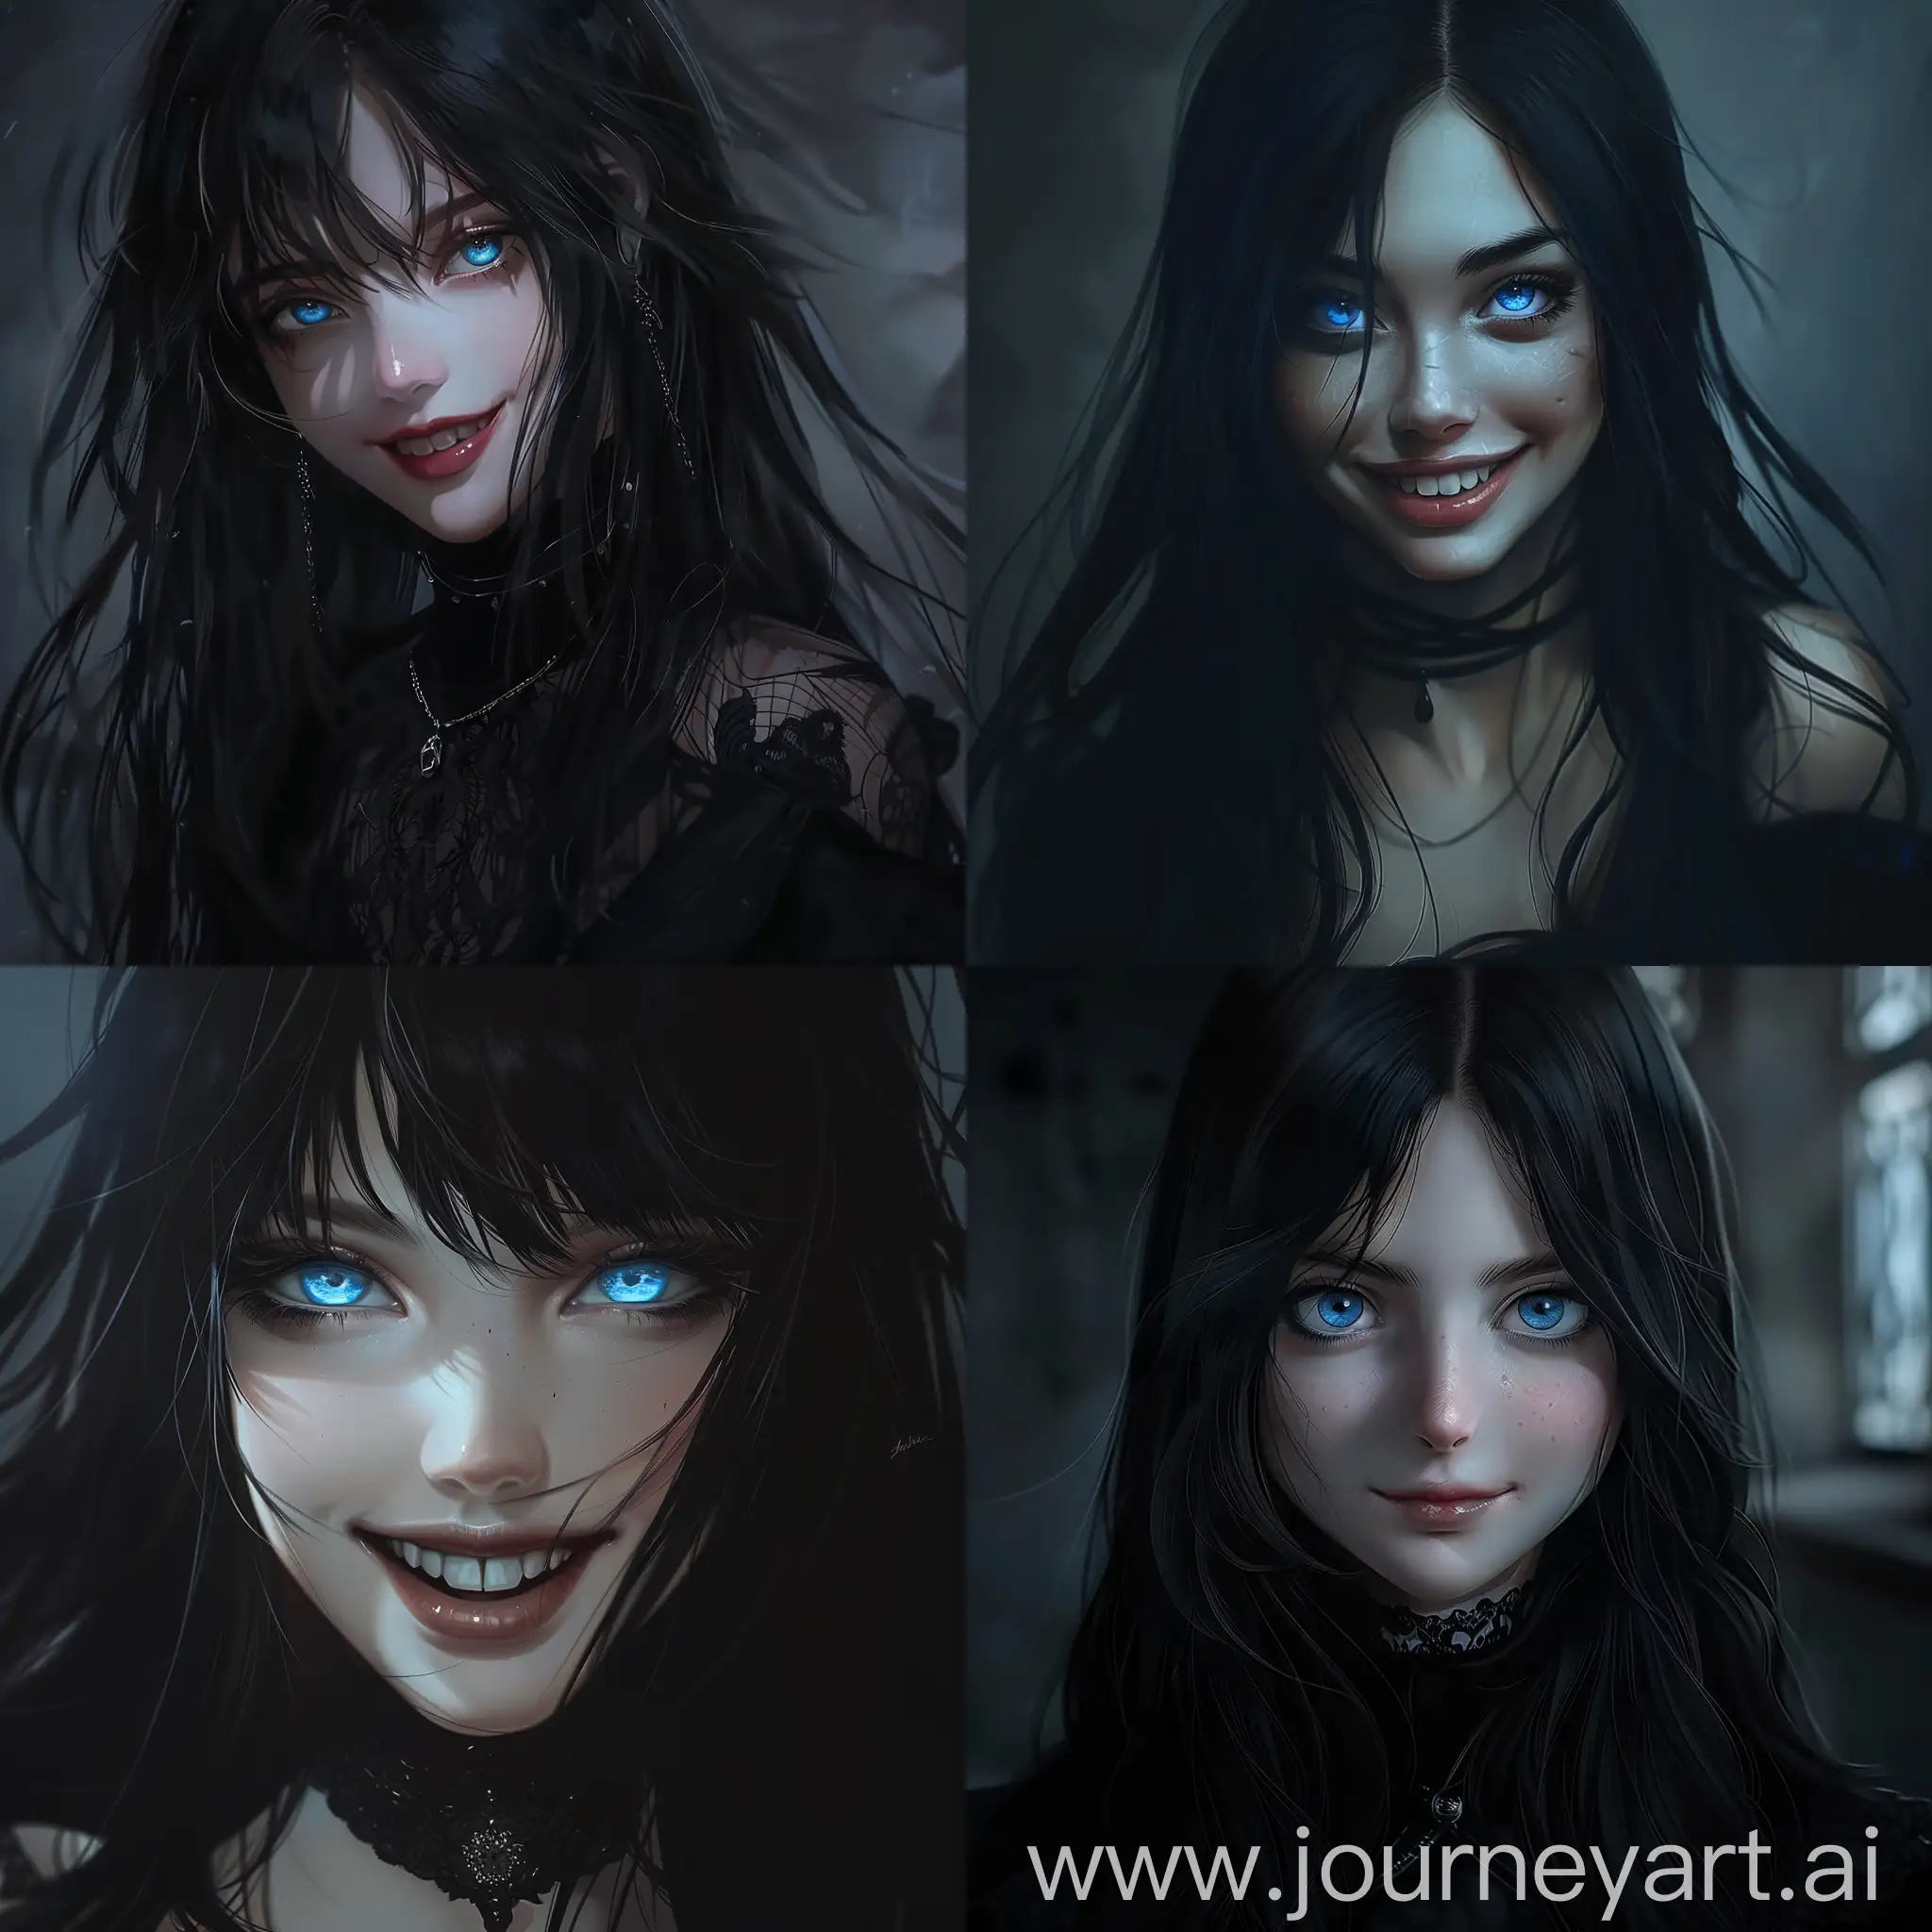 Anime-Portrait-of-a-Beautiful-Woman-with-Black-Clothes-and-Blue-Eyes